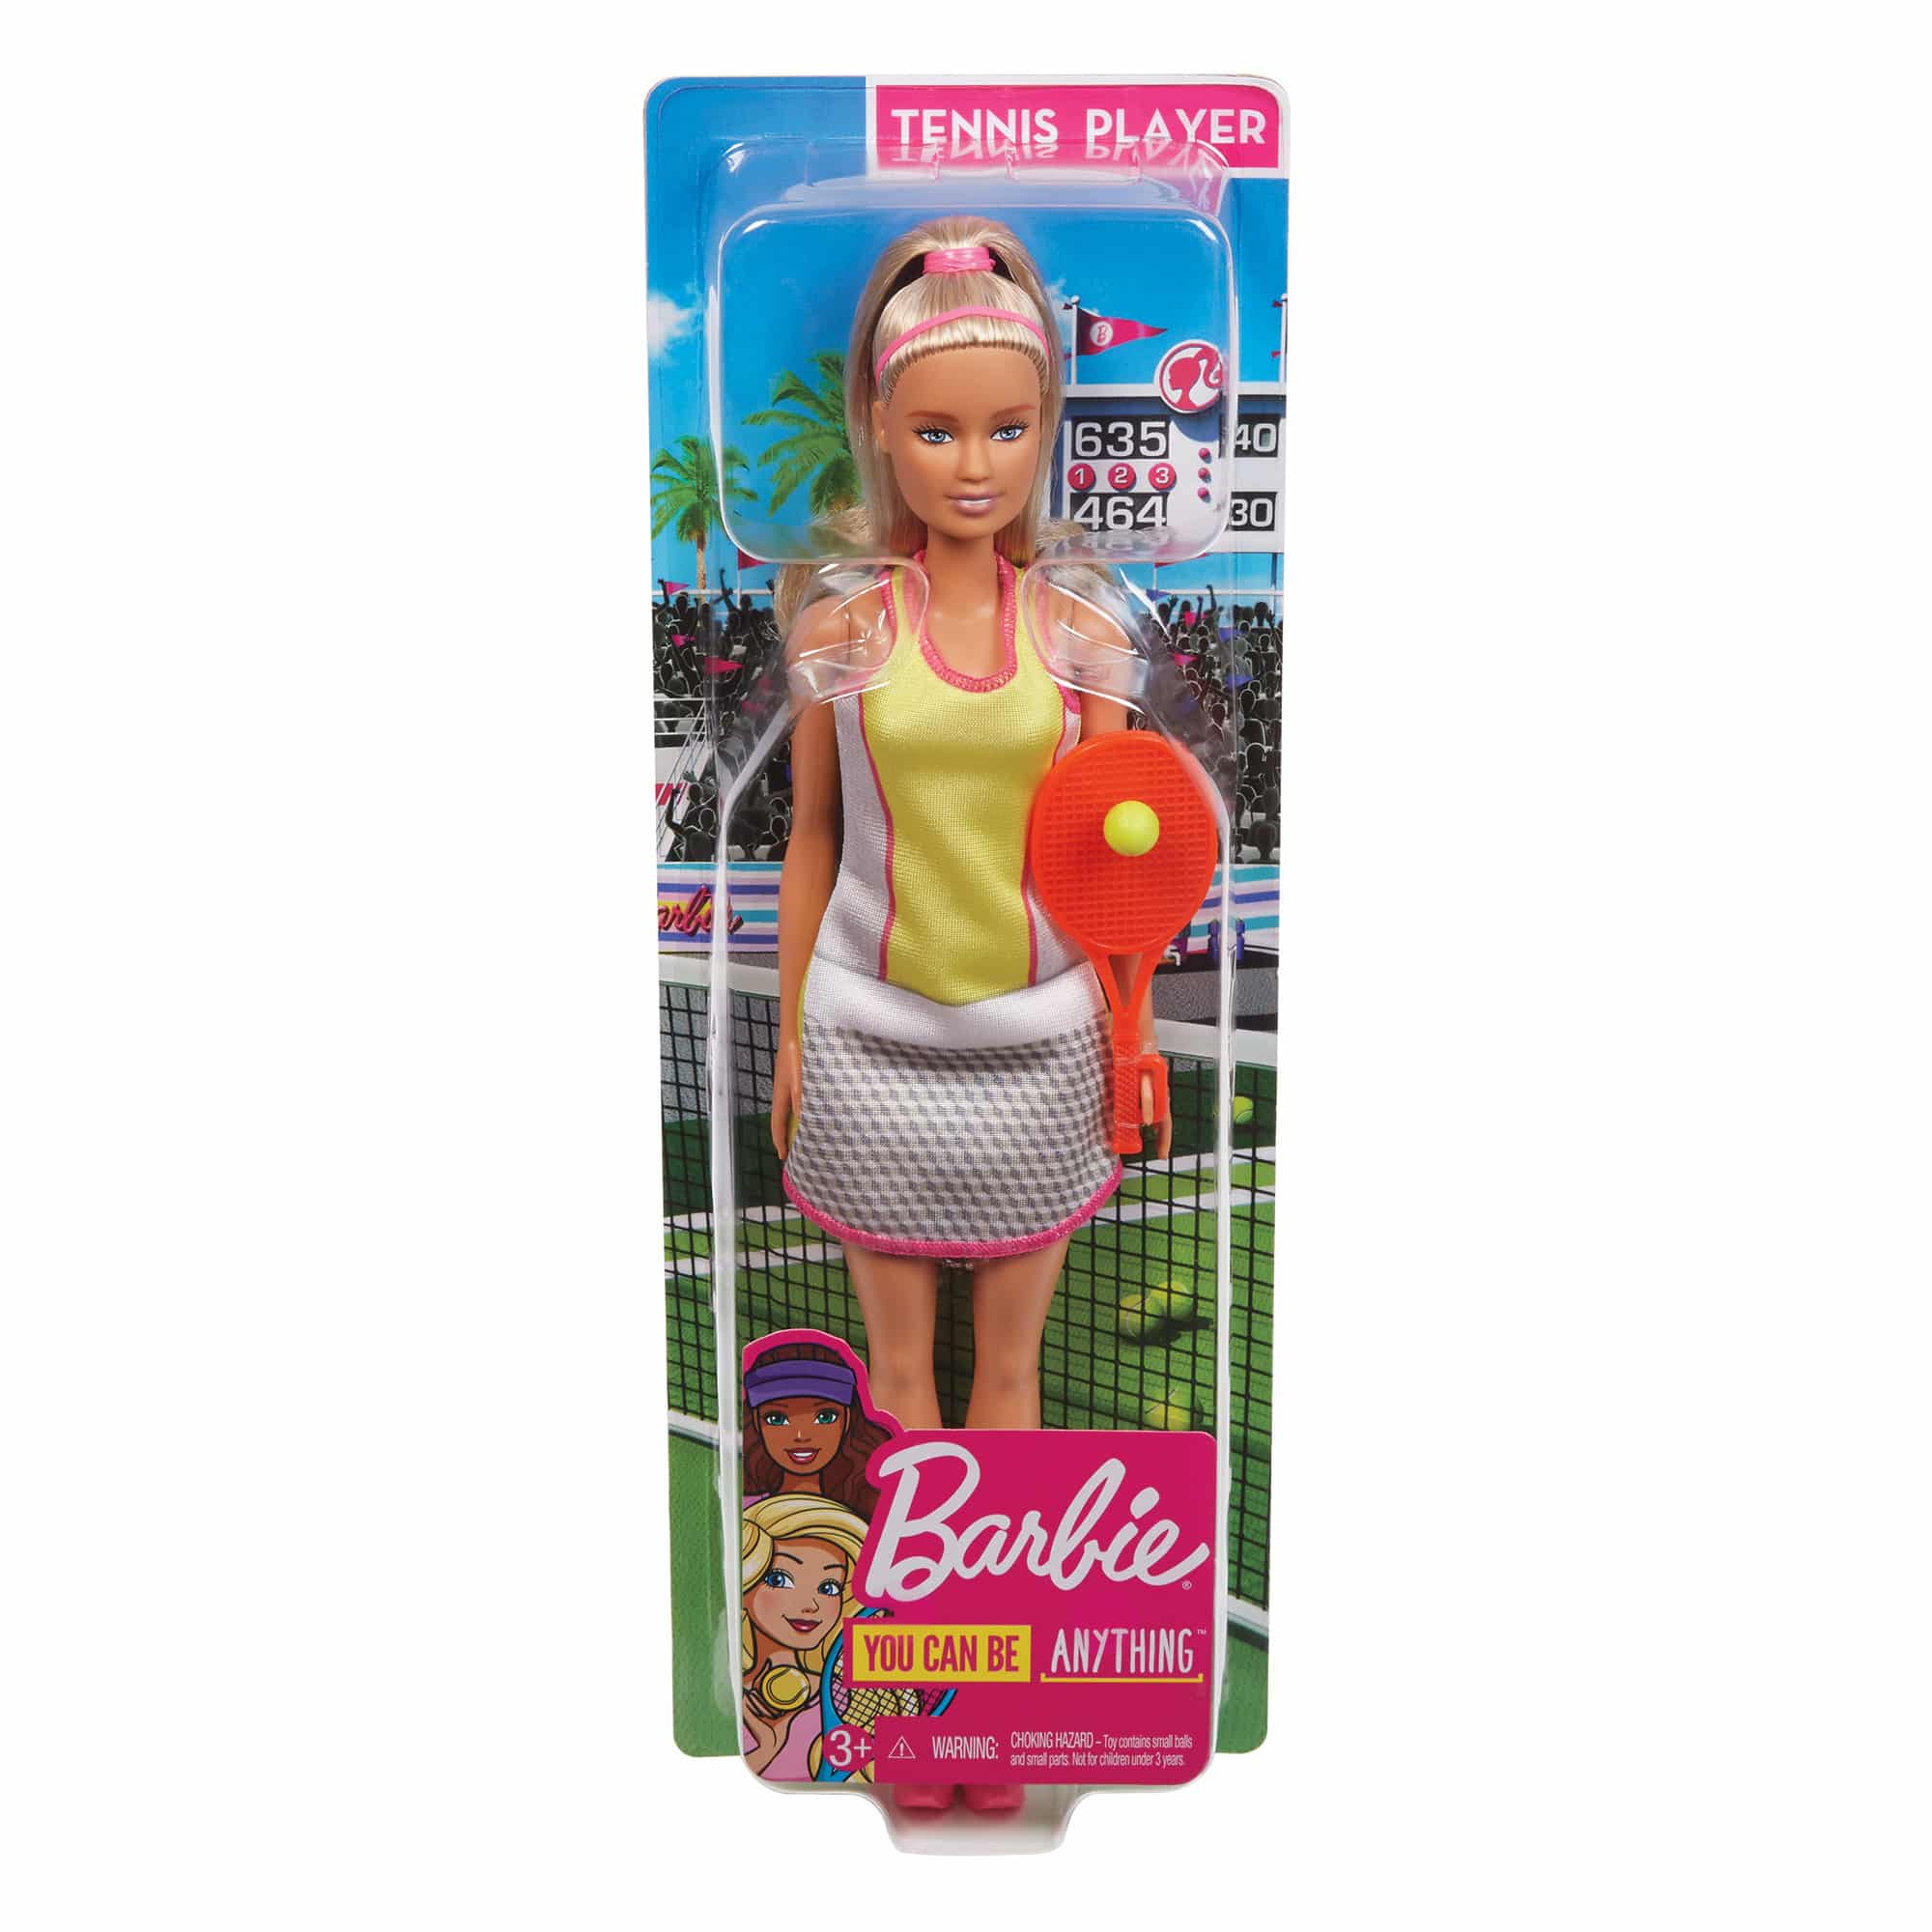 Barbie - You Can Be Anything - Tennis Player